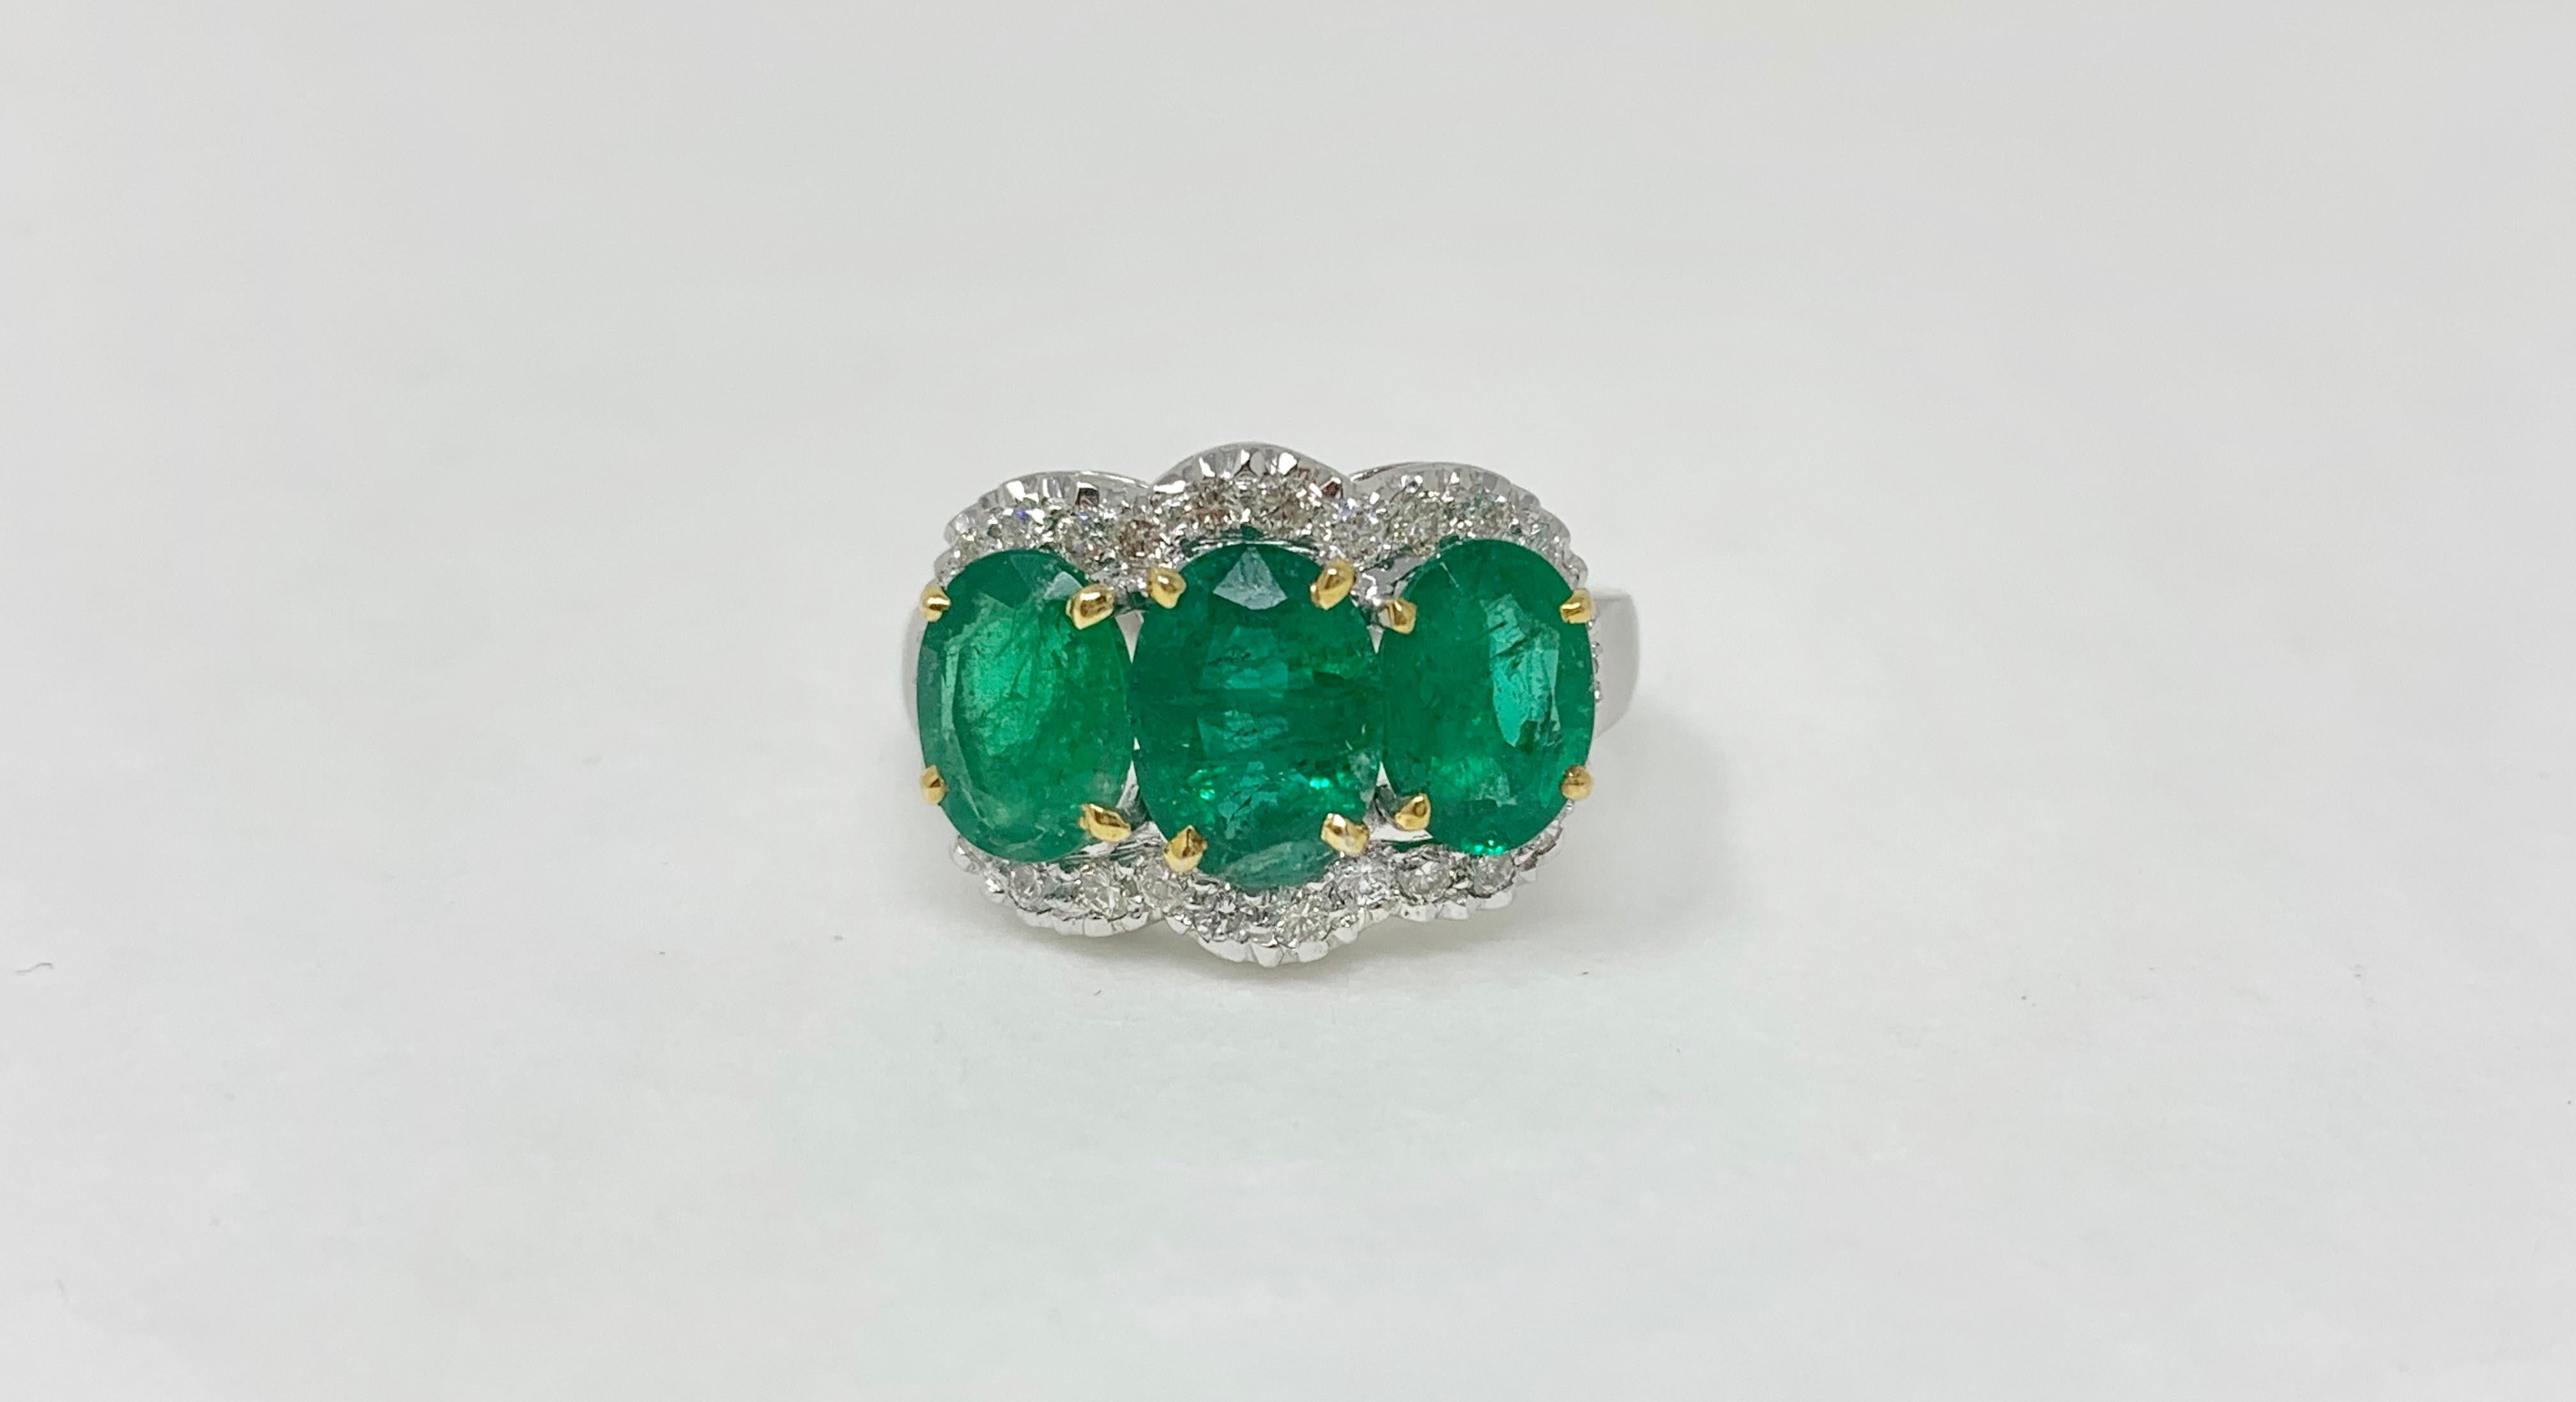 Moguldiam Inc three stone oval emerald and diamond ring is custom handmade in 18 k white gold. 
Emerald weight : 3.52 carat 
Diamond weight : 0.51 carat
Gold : 6.900 grams 
Ring size : 7 and can be sized